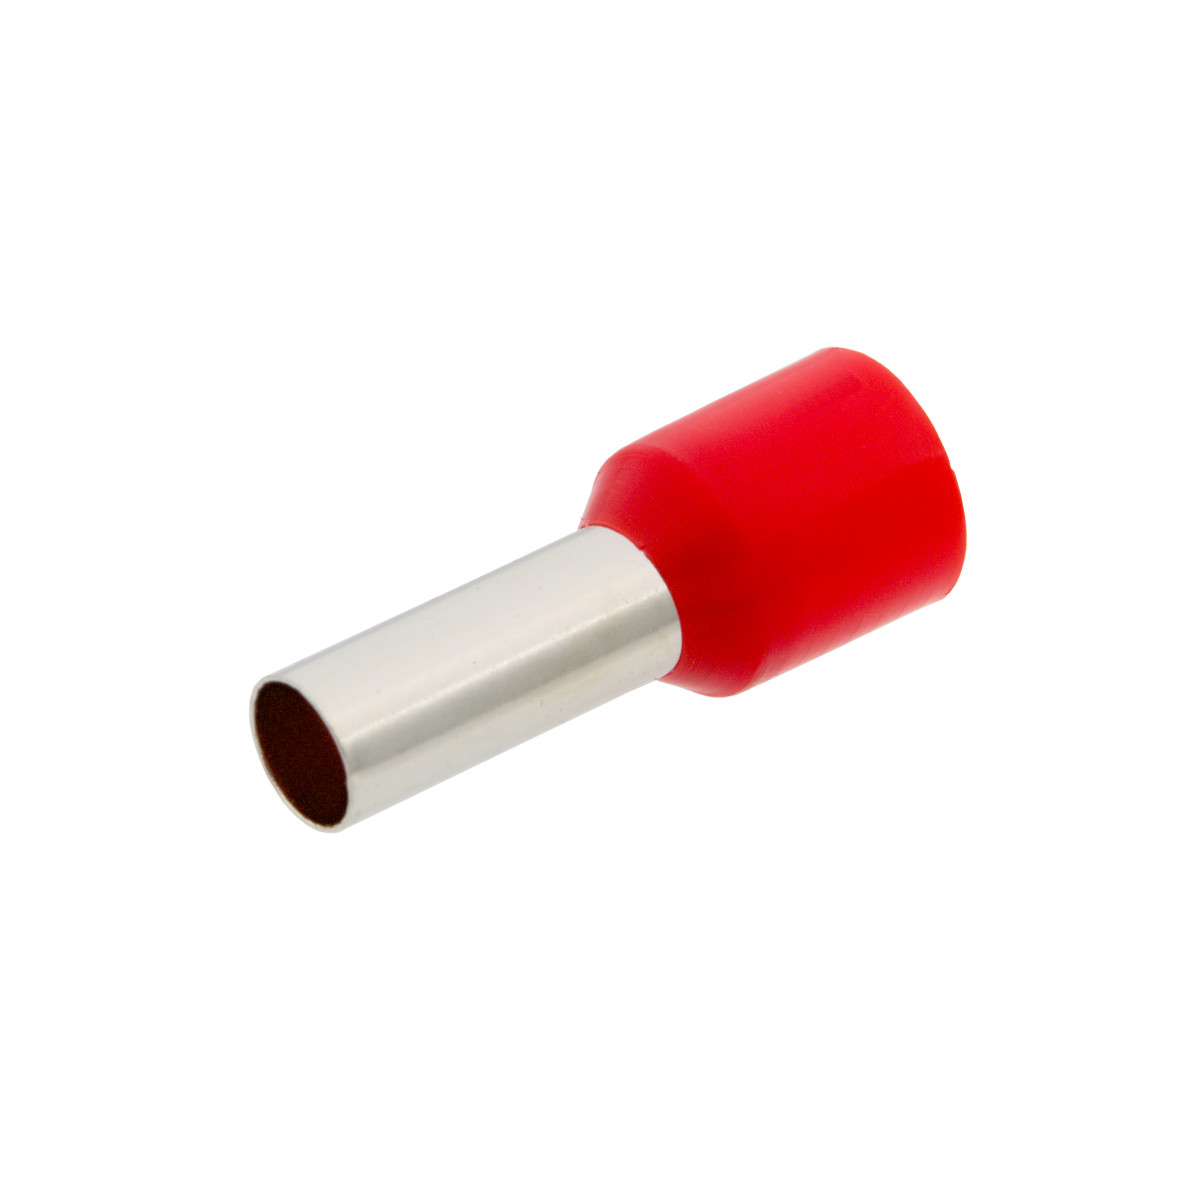 Insulated ferrule for 10.00mm² [AWG 7] cable